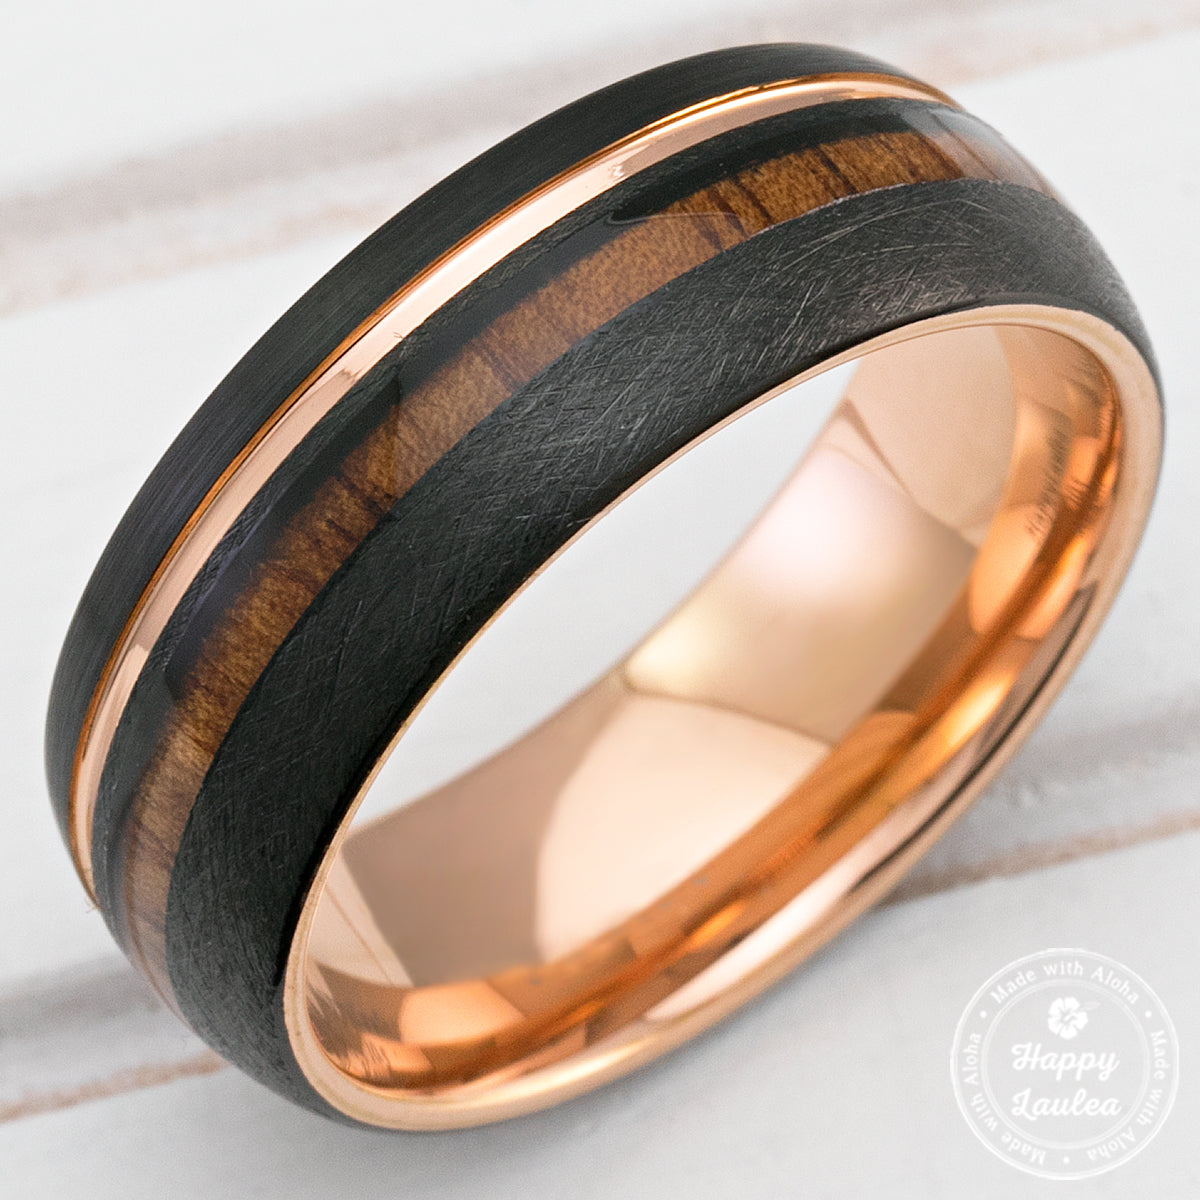 Black & Rose Gold Tungsten Ring with Offset Strip and Koa Wood Inlay - 8mm, Dome Shape, Comfort Fitment